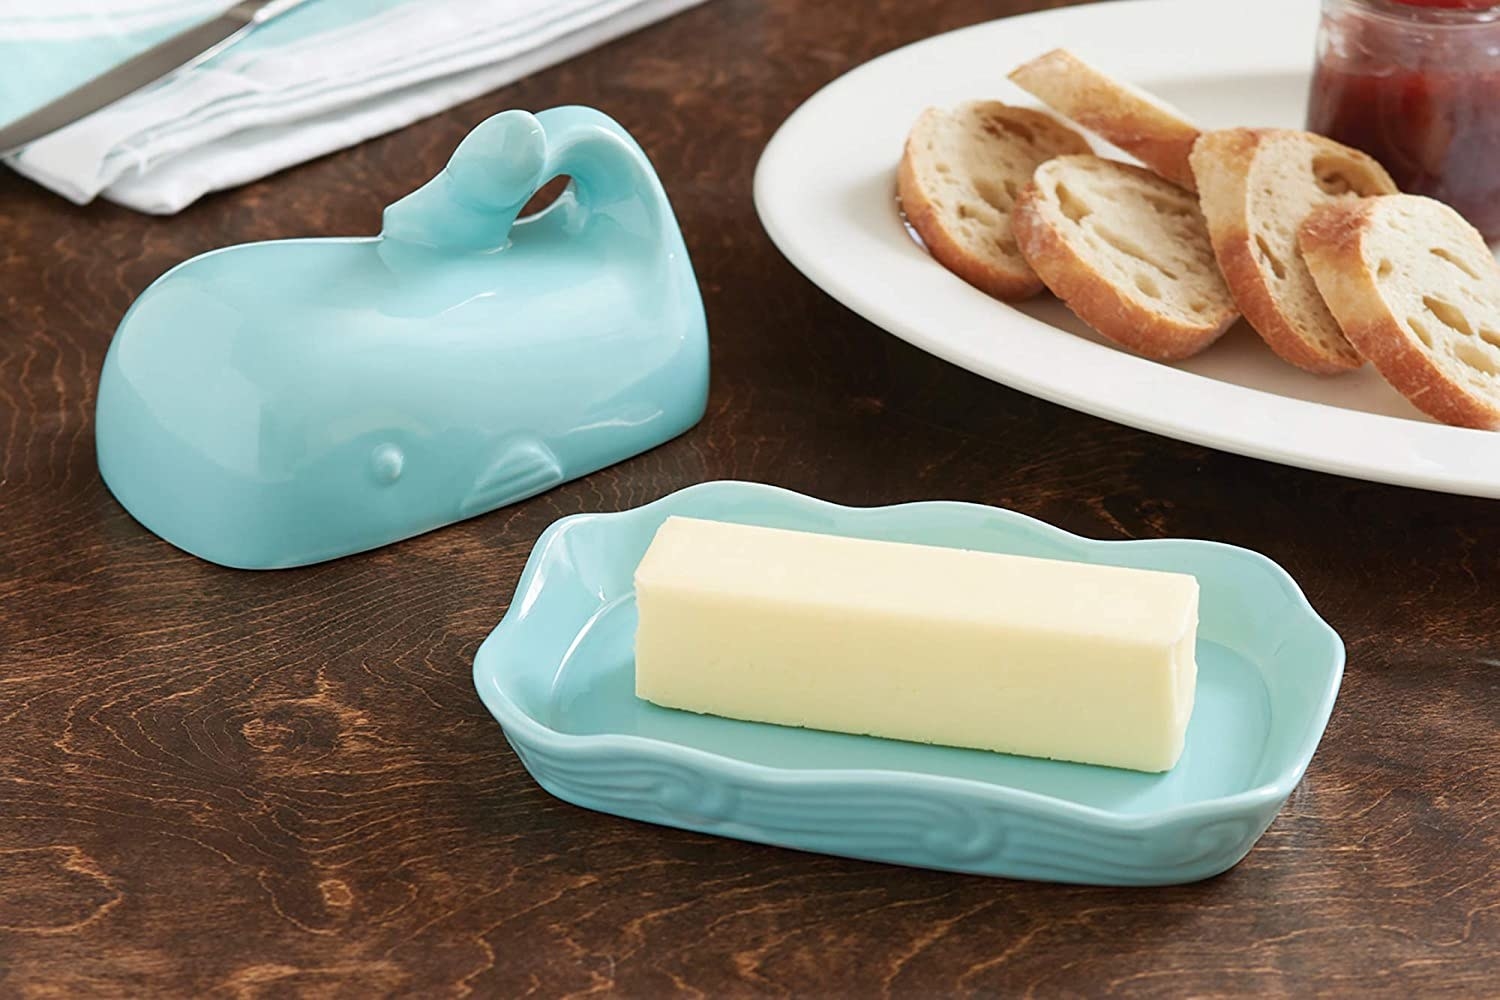 A ceramic butter dish with a cover that looks like a whale